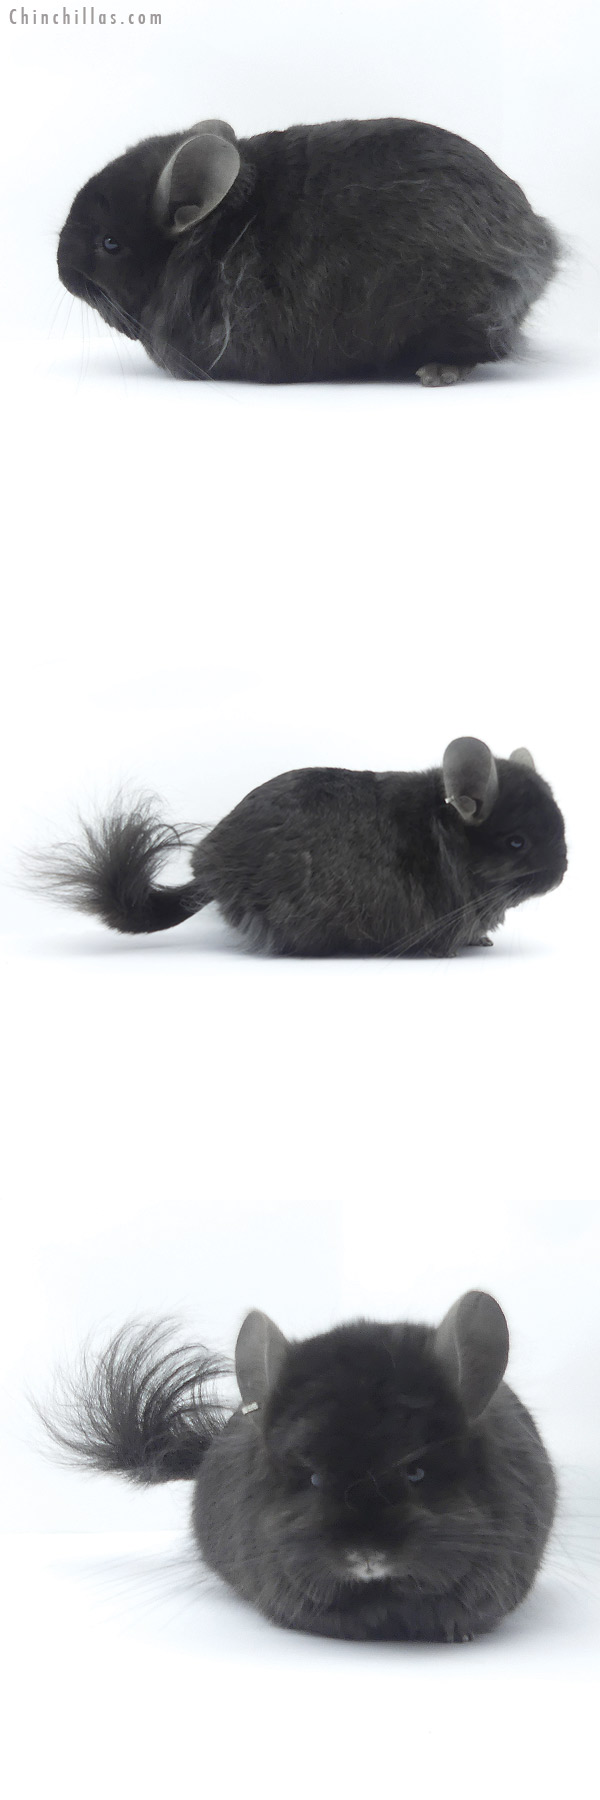 Chinchilla or related item offered for sale or export on Chinchillas.com - 19401 Brevi Type Ebony ( Locken Carrier ) G2  Royal Persian Angora Male Chinchilla